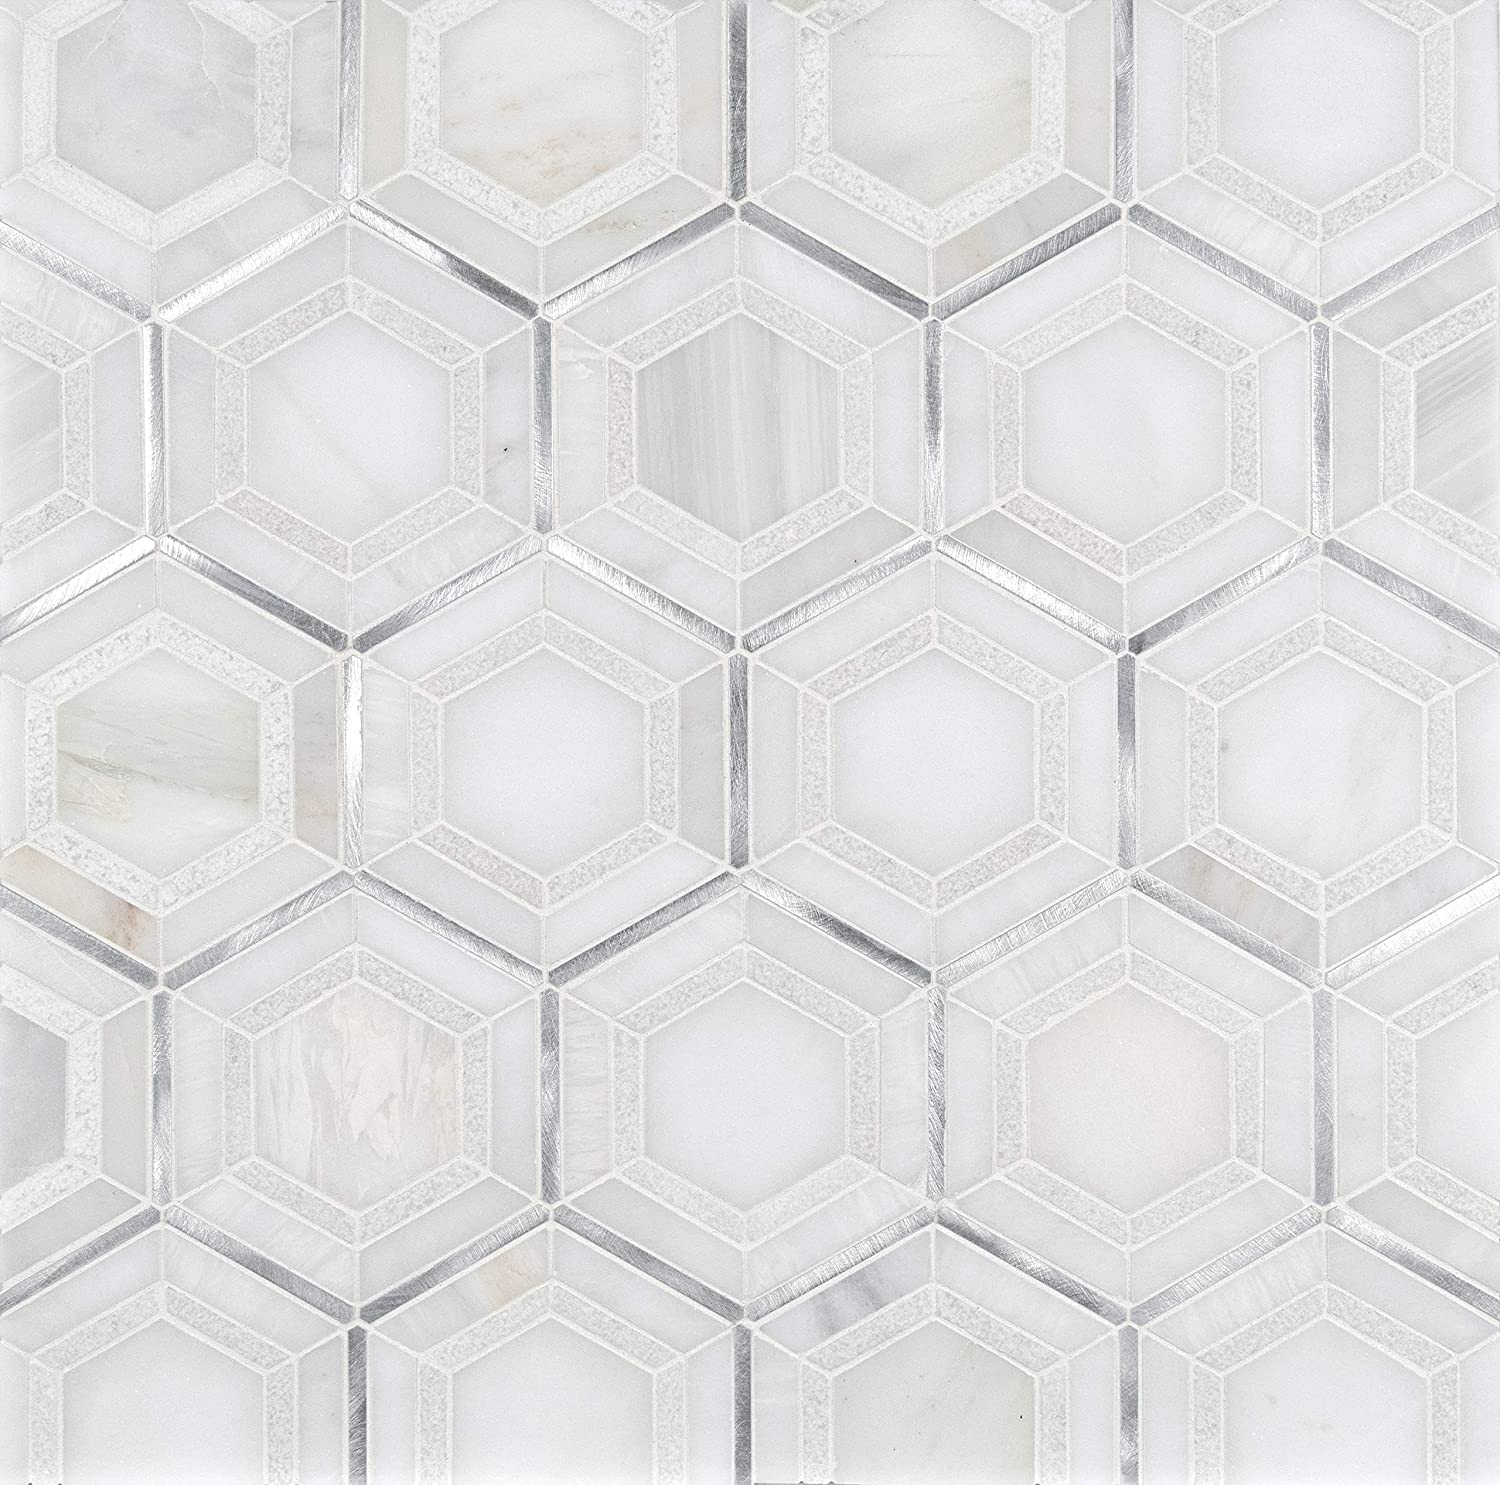 MS International Medici Silver Pattern 12.44 in. x 10.83 in. Marble Mesh-Mounted Mosaic Wall Tile for Bathroom, Floor Tile, Kitchen Backsplash and Countertop Tile, Gray, White, Silver